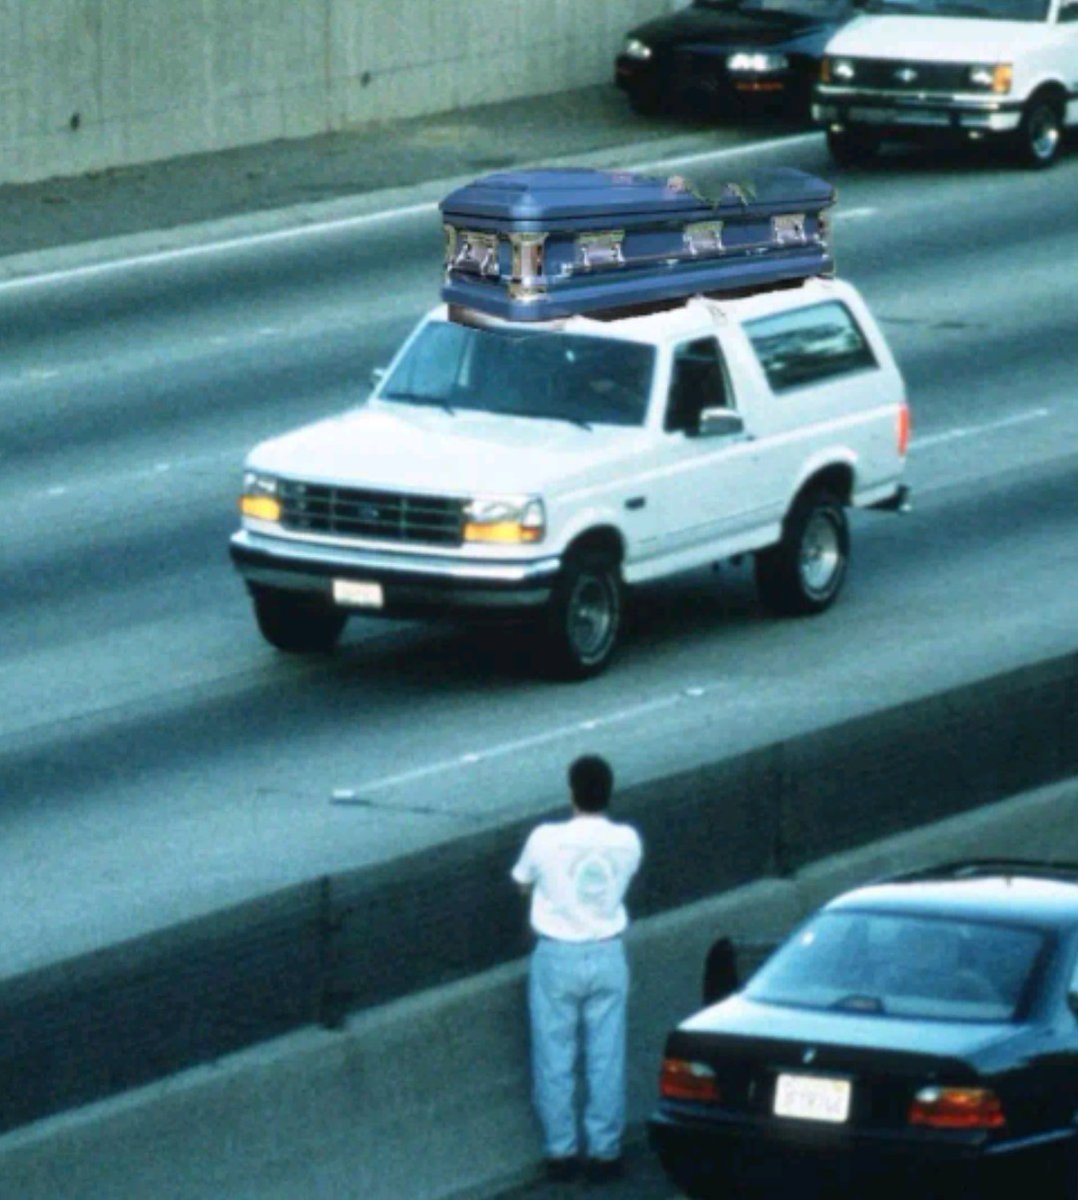 Did you see OJ's funeral procession?